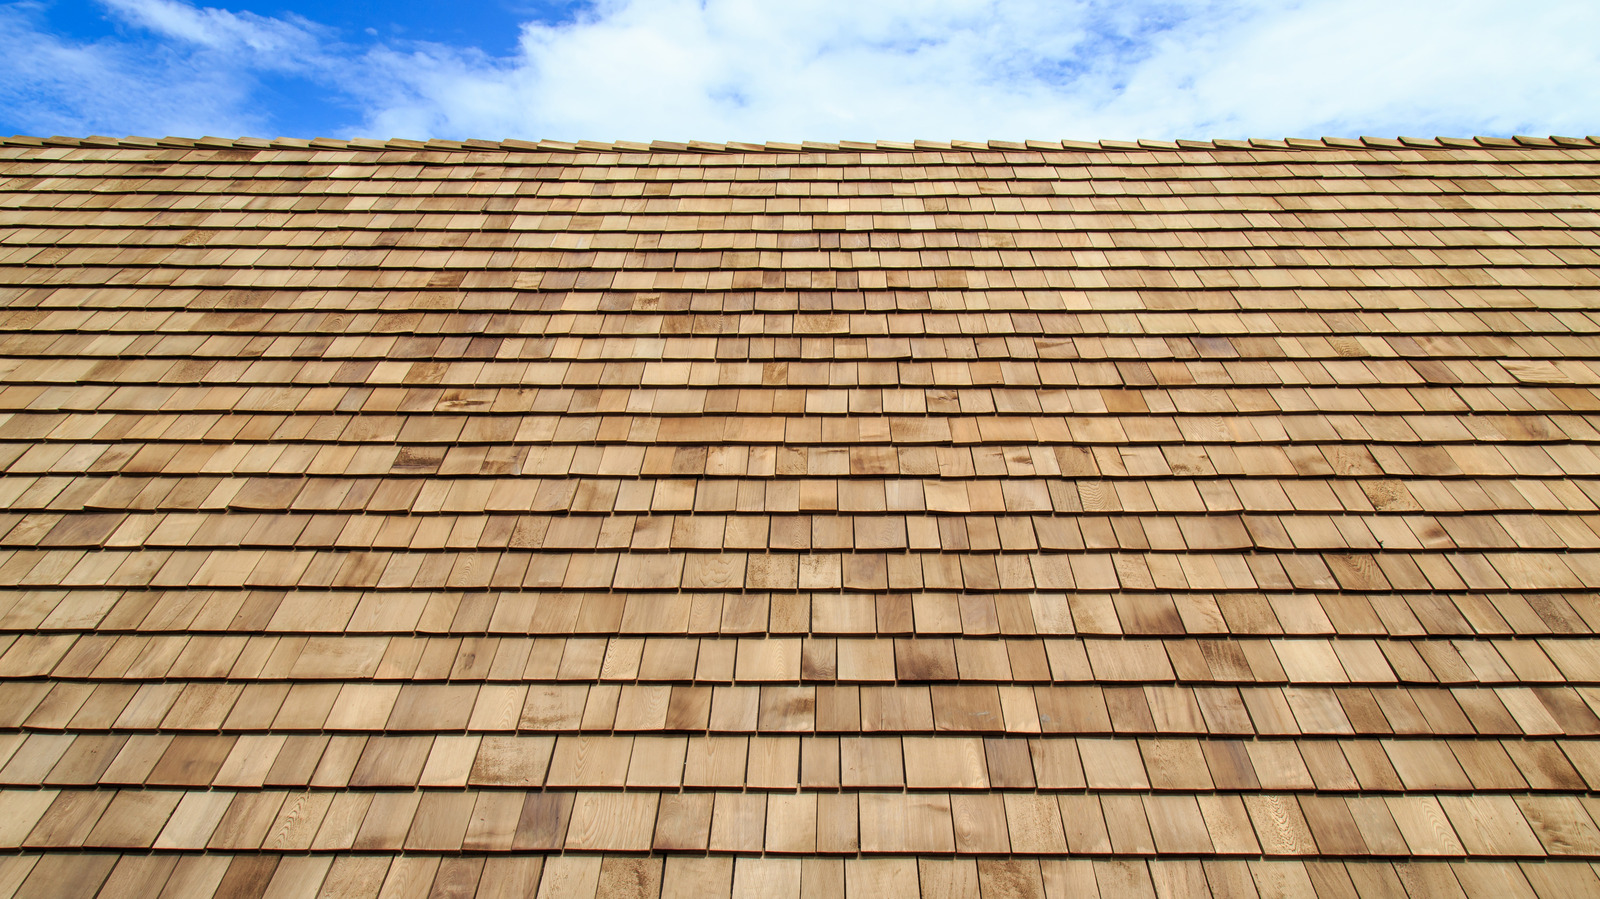 The Roofing Material That’s Banned In Los Angeles, California